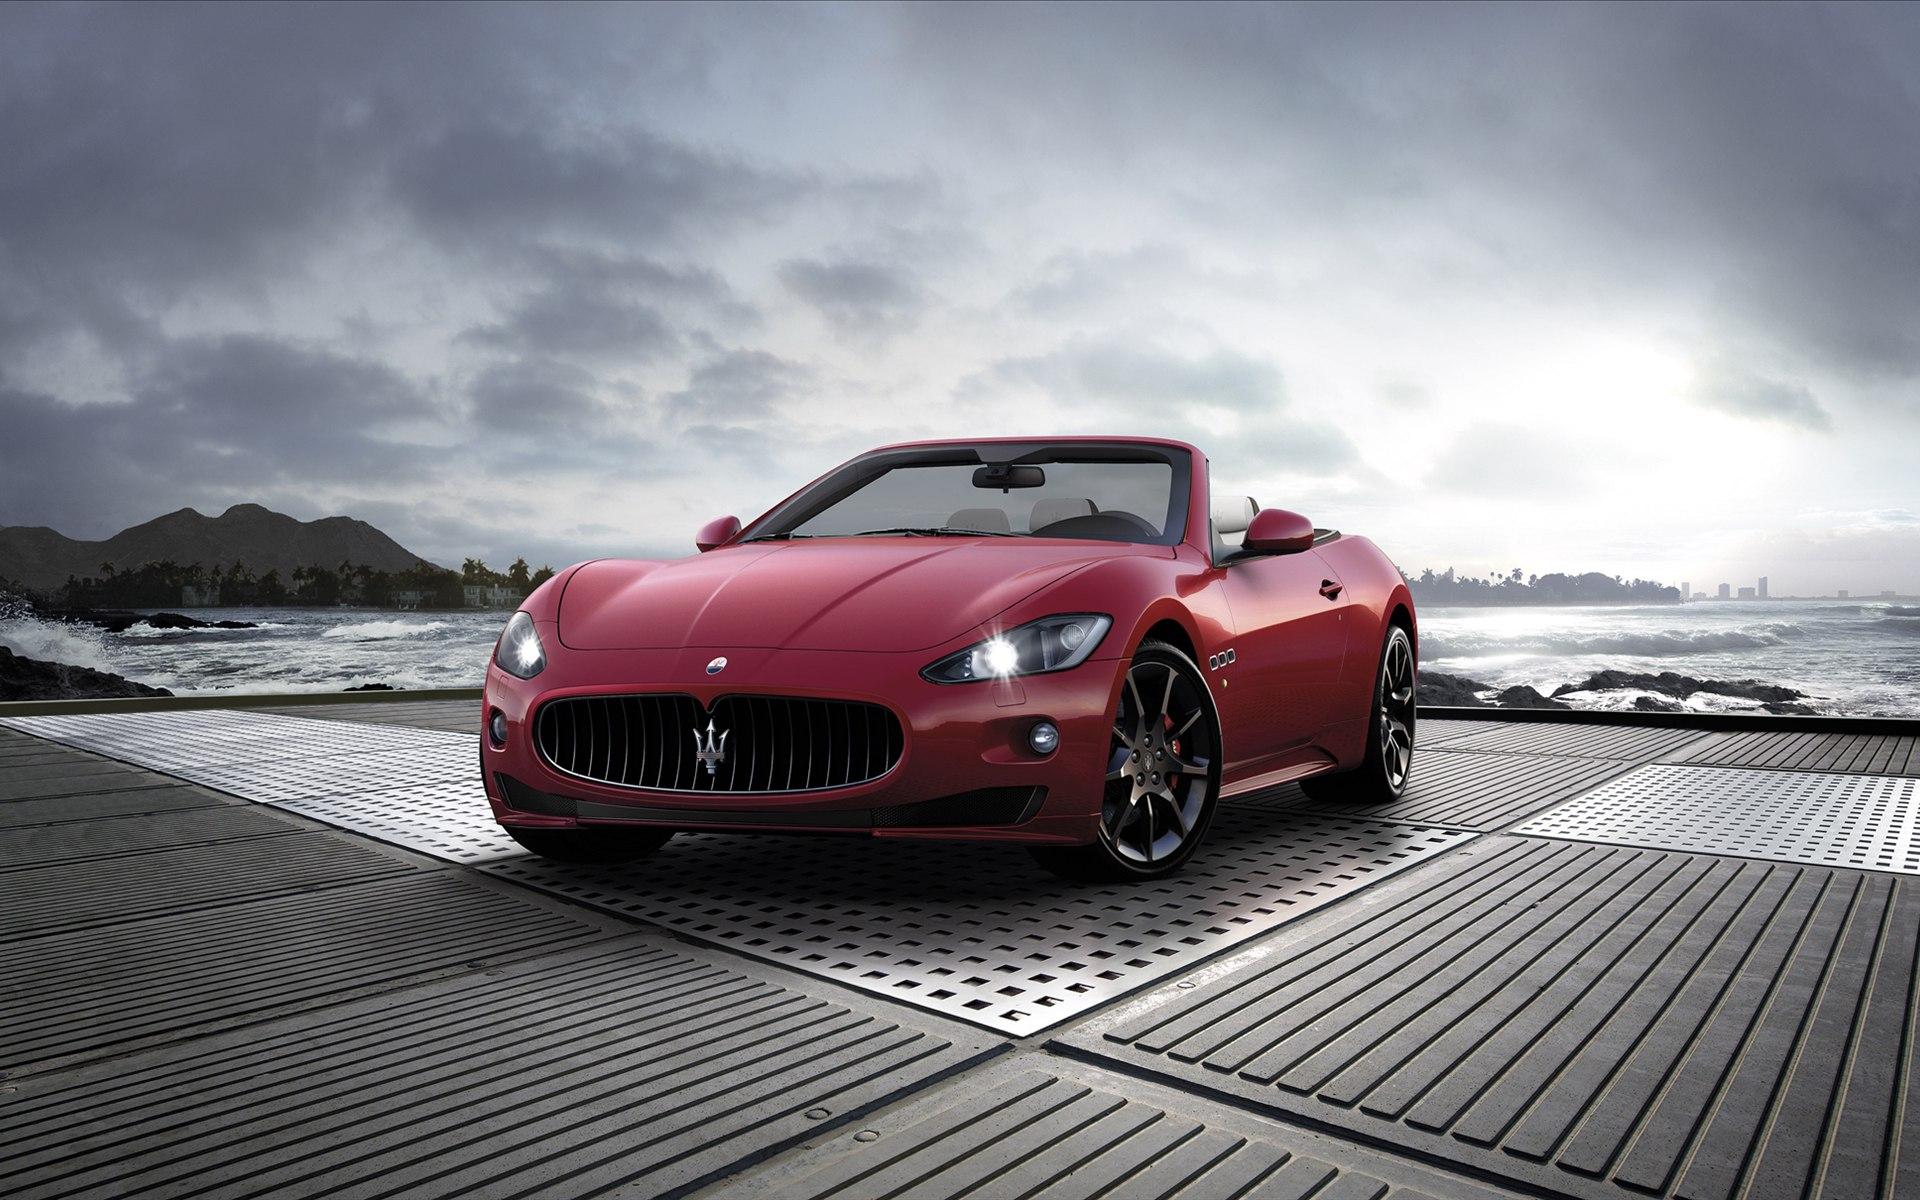 Sports car hd wallpapers for pc - Car Pictures